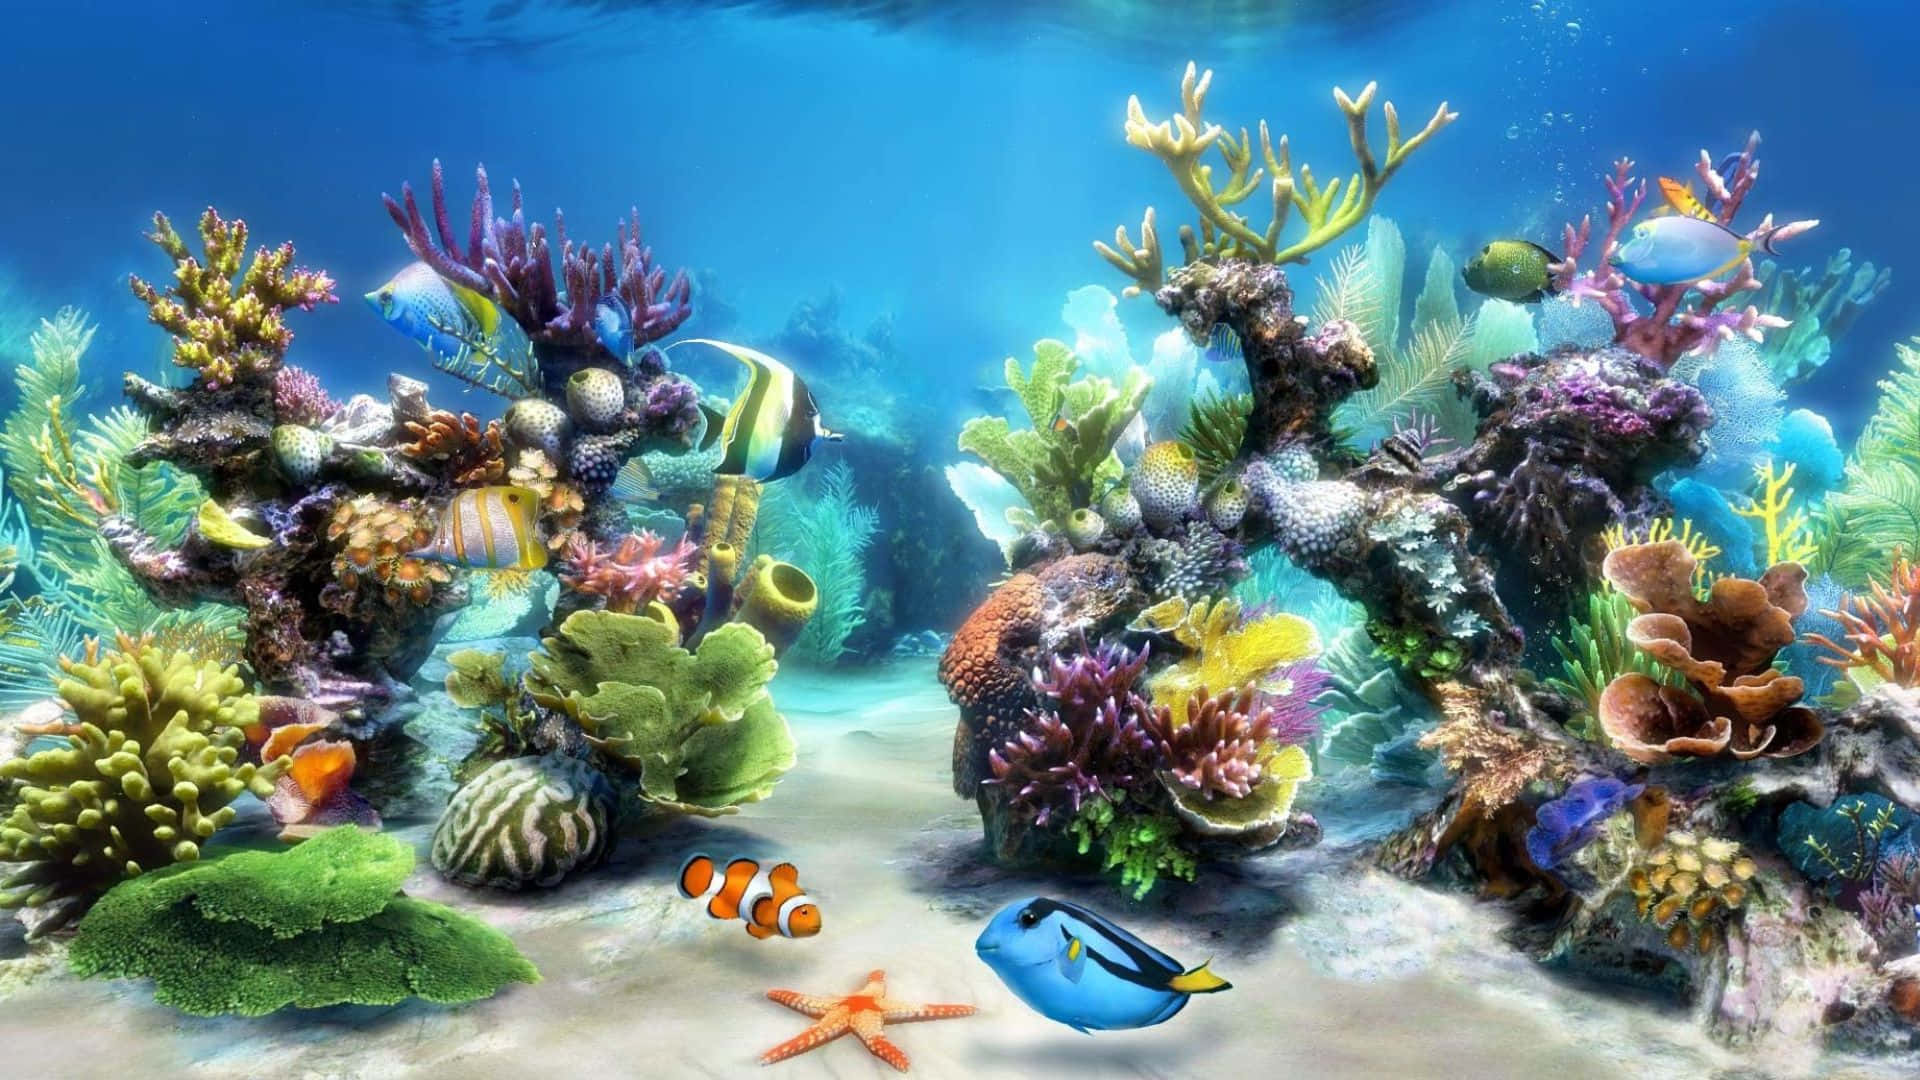 Download Enjoy a Virtual View of the Submerged Wonders in a 3D Fish Tank |  